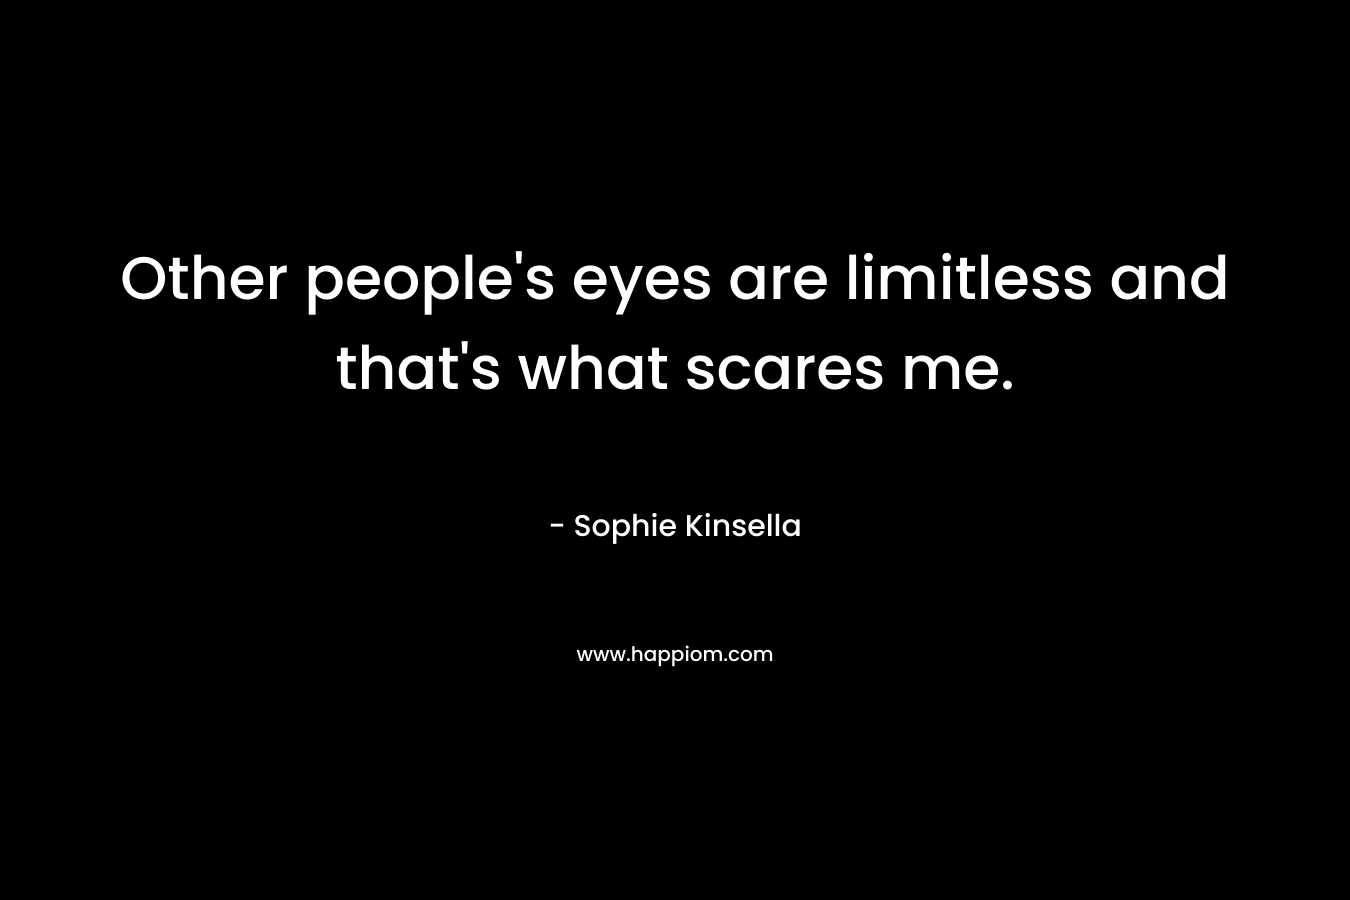 Other people's eyes are limitless and that's what scares me.